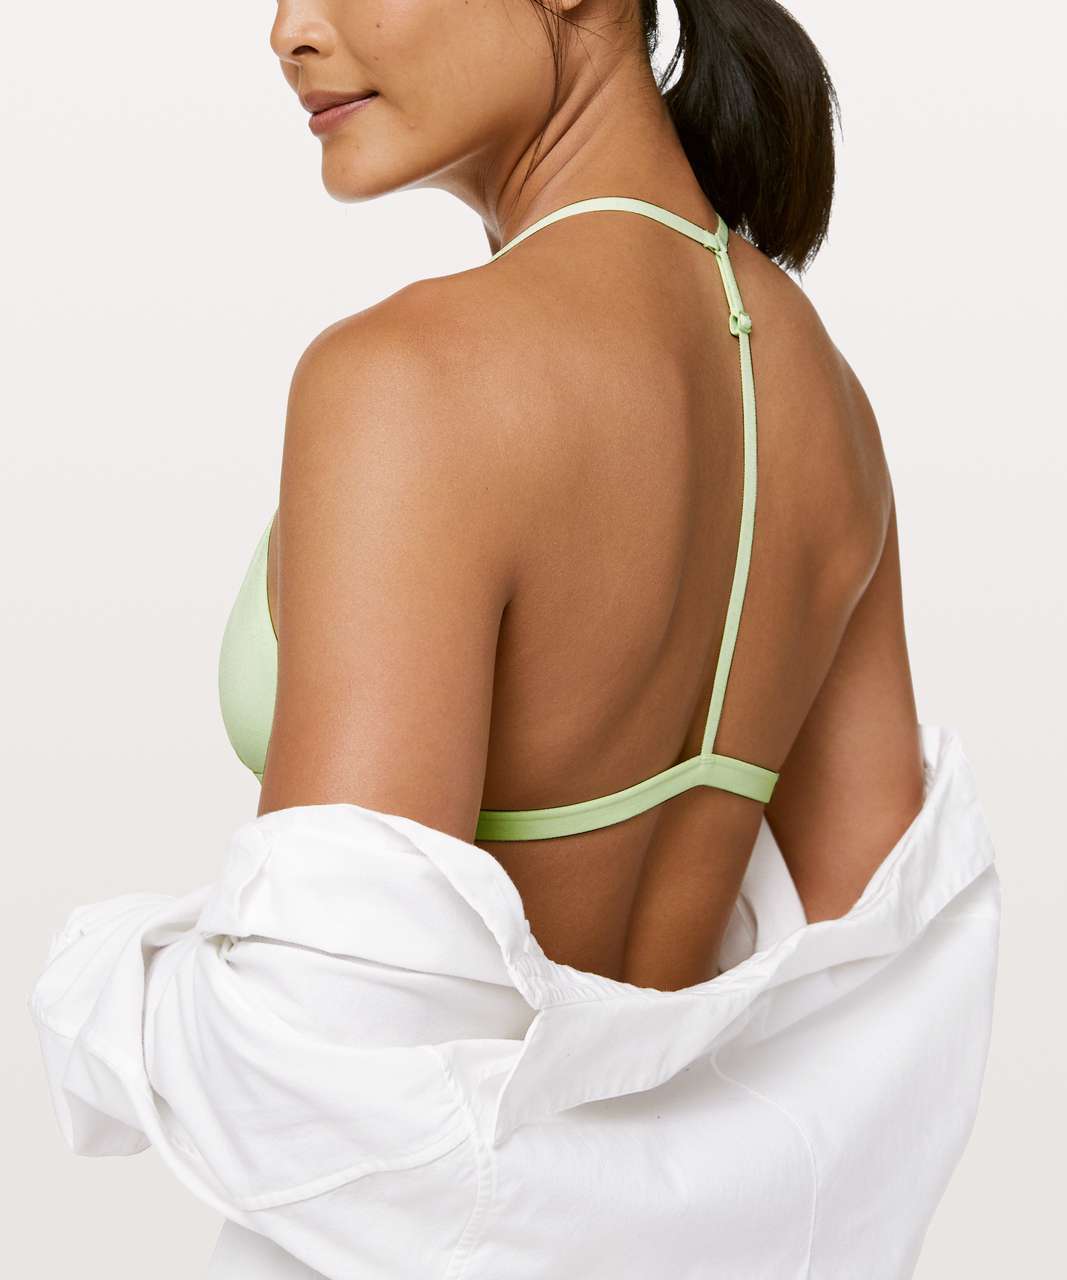 Lululemon Simply There Triangle Bralette - Citrus Ice